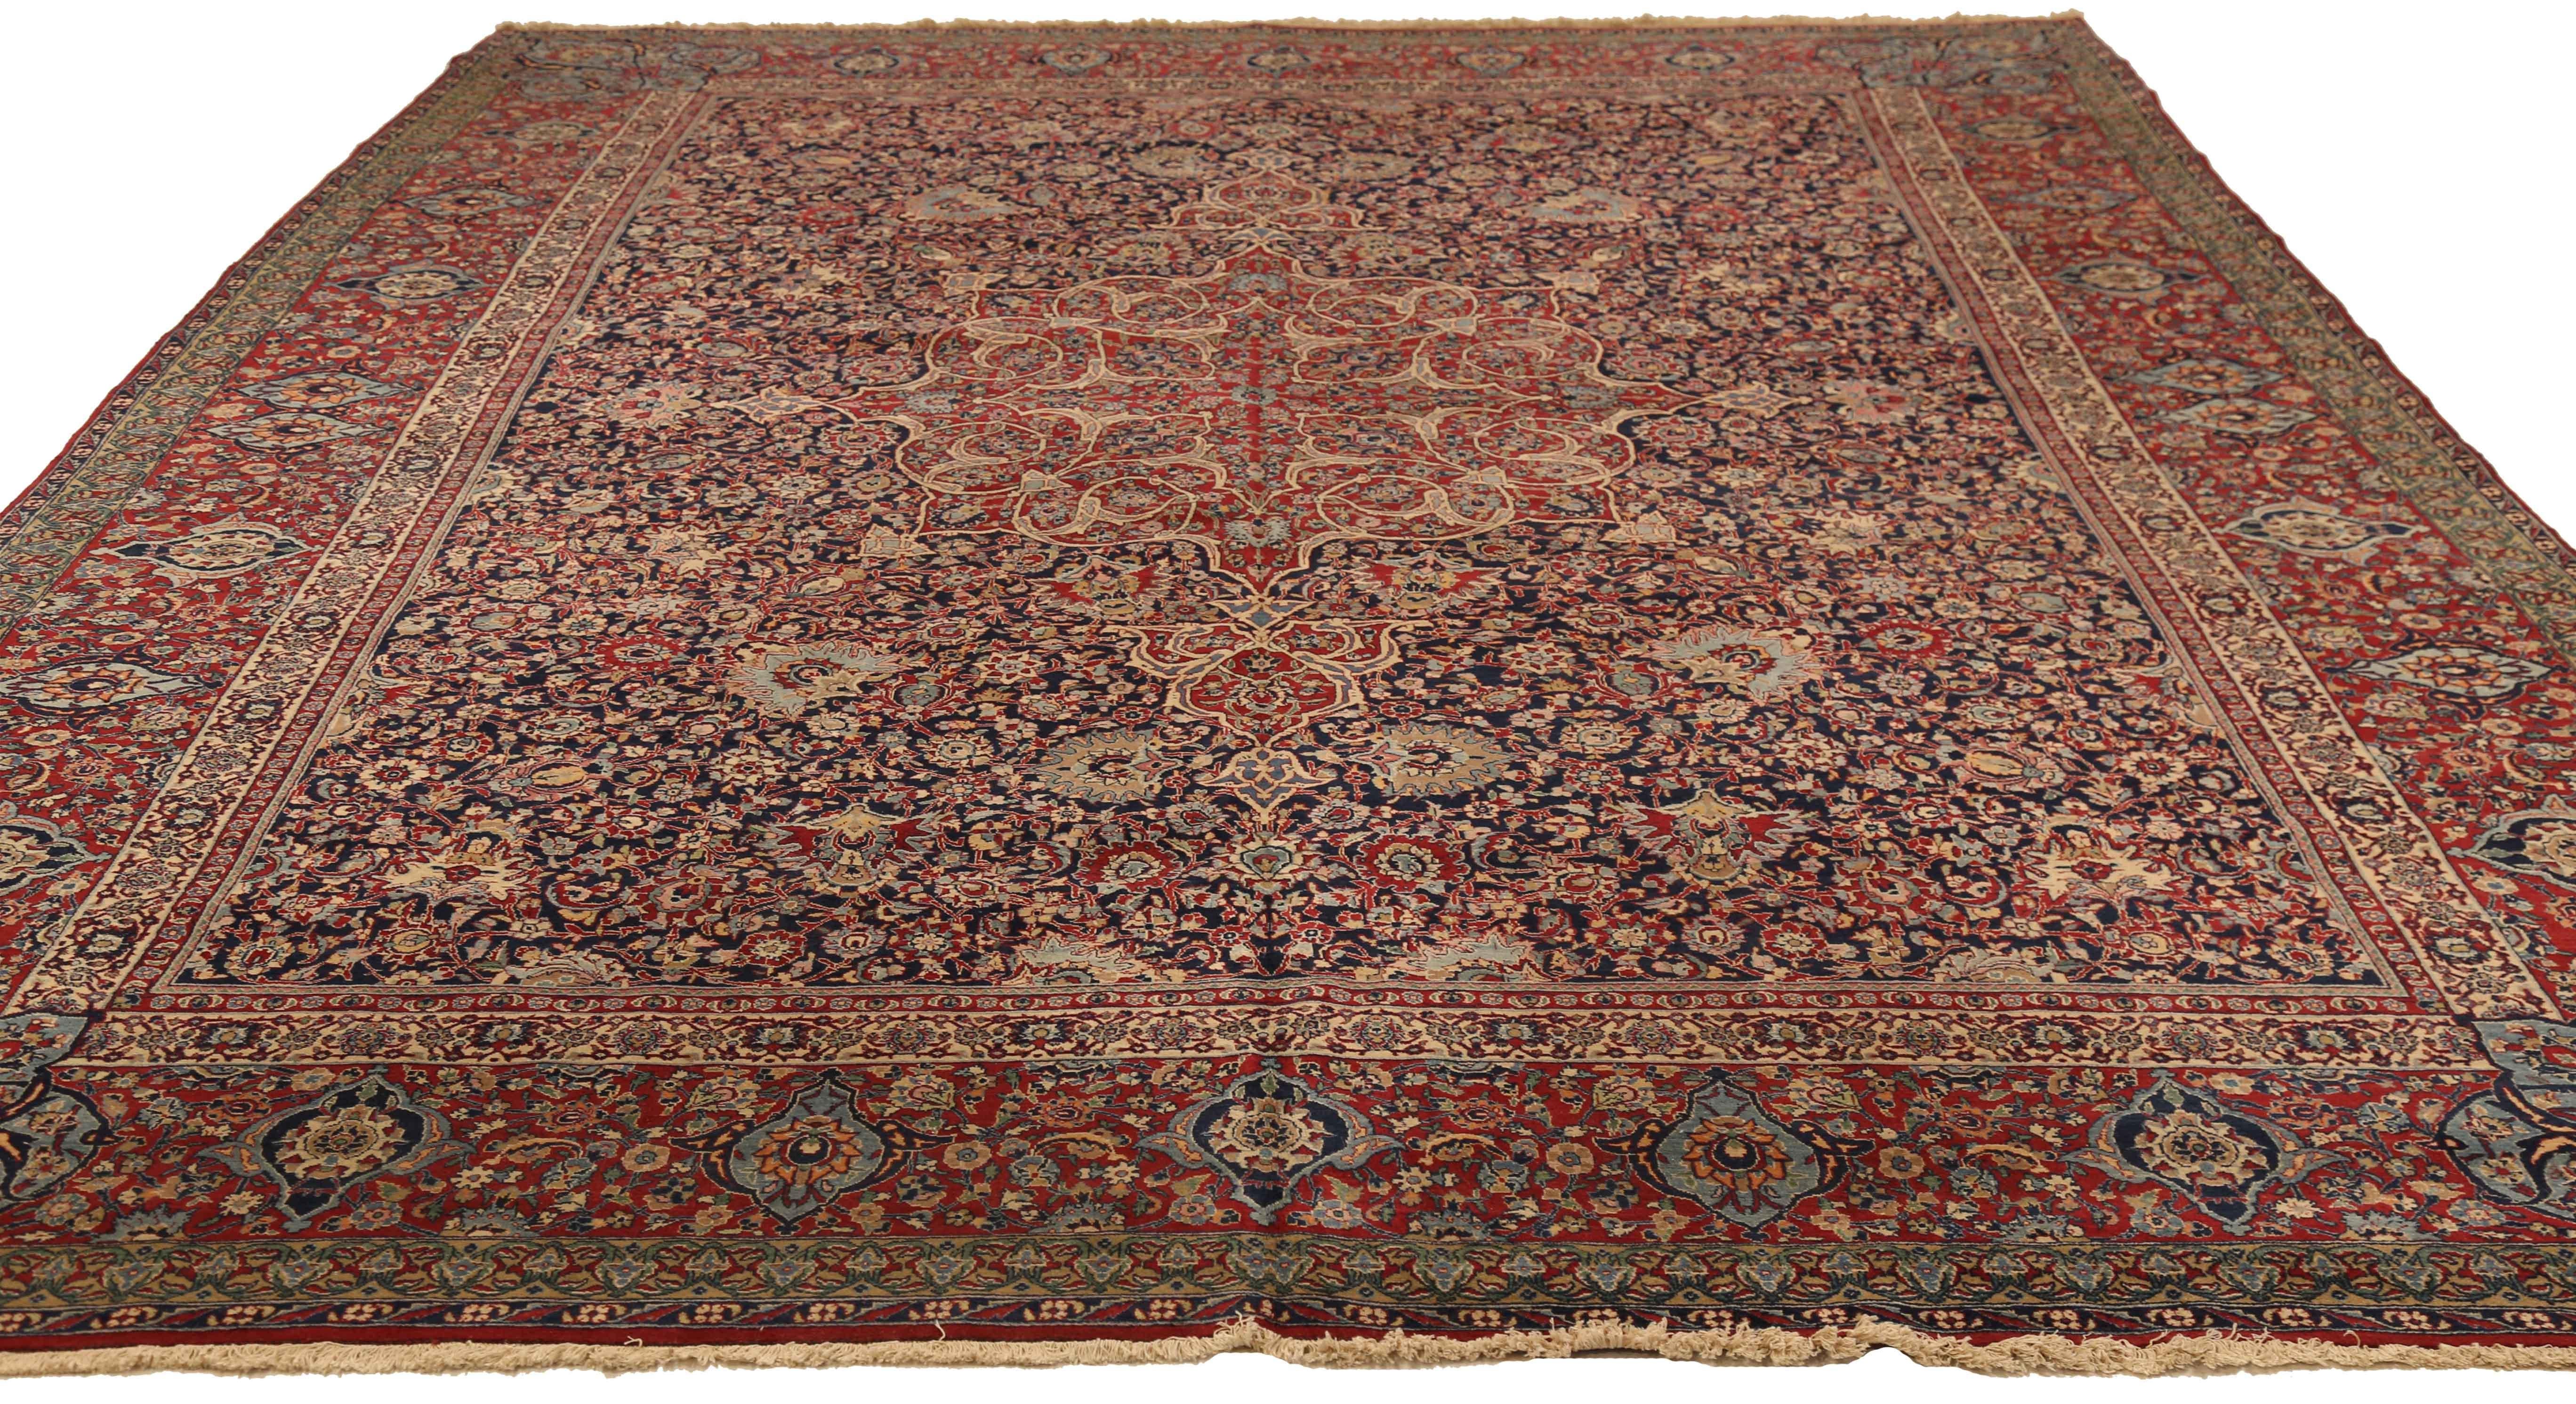 Hand-Knotted Antique Persian Tehran Rug with Grand Medallion and Floral Patterns, circa 1920s For Sale